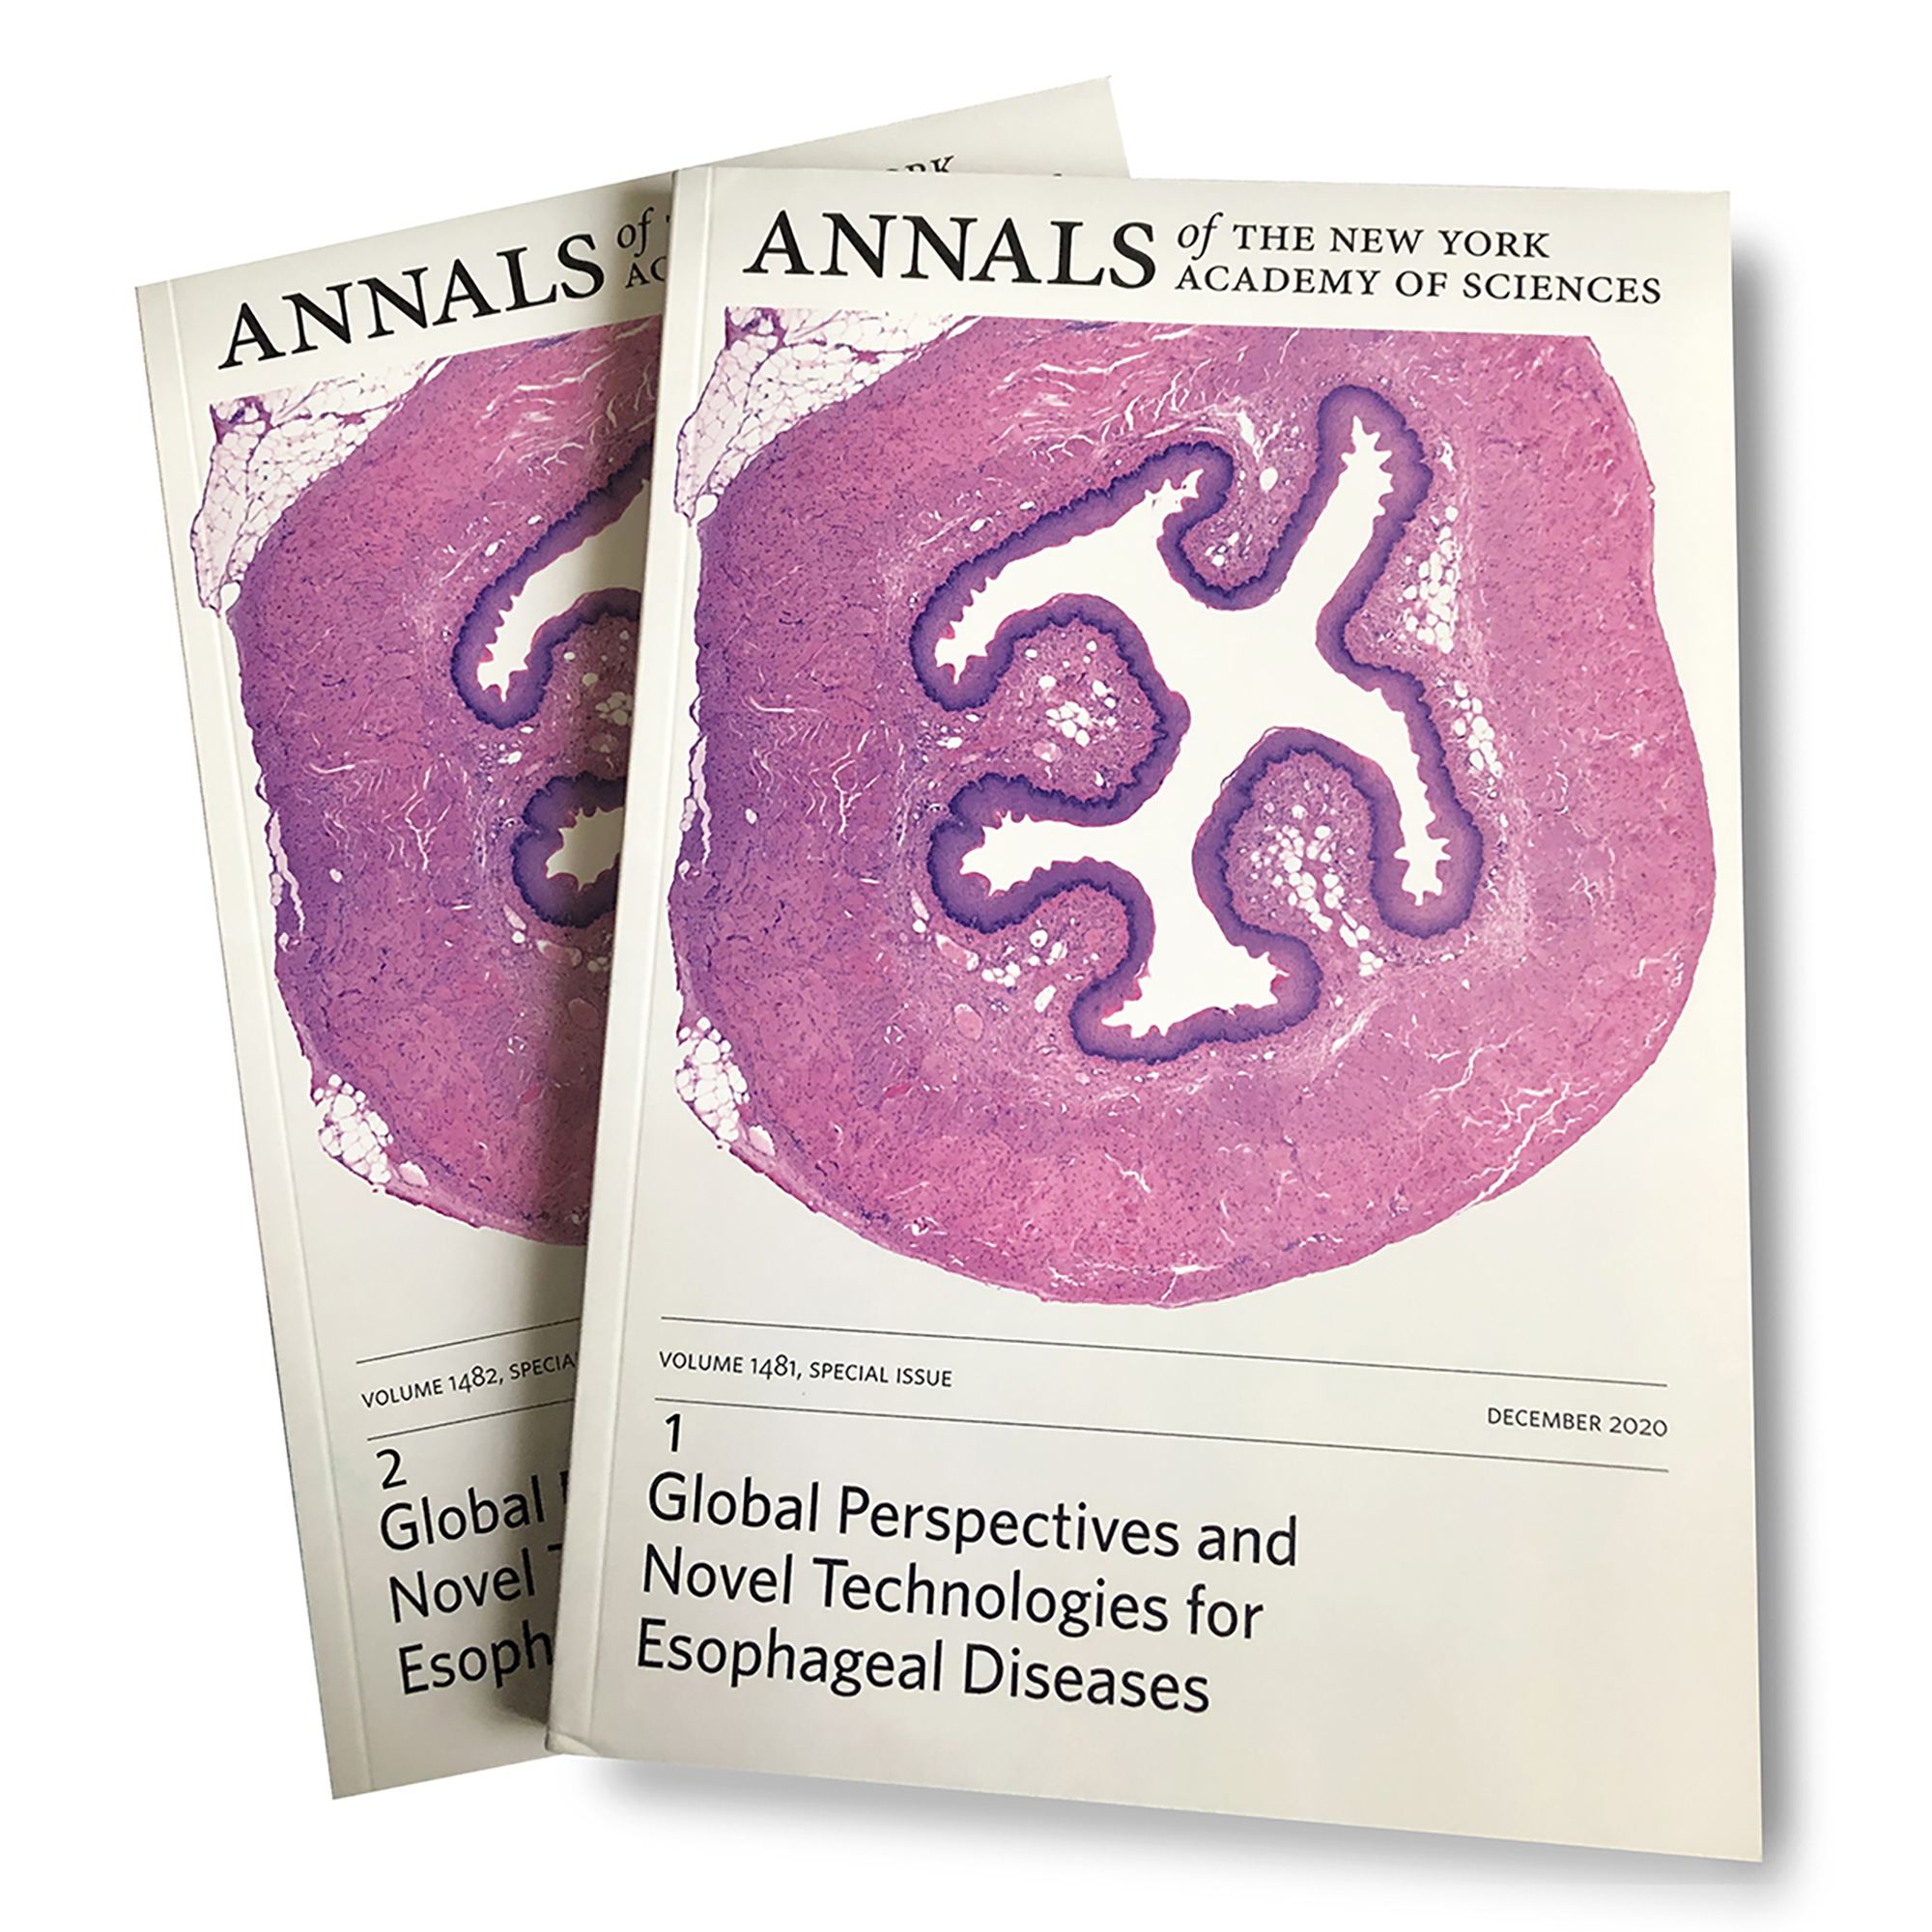 2020: Global Perspectives and Novel Technologies for Esophageal Diseases